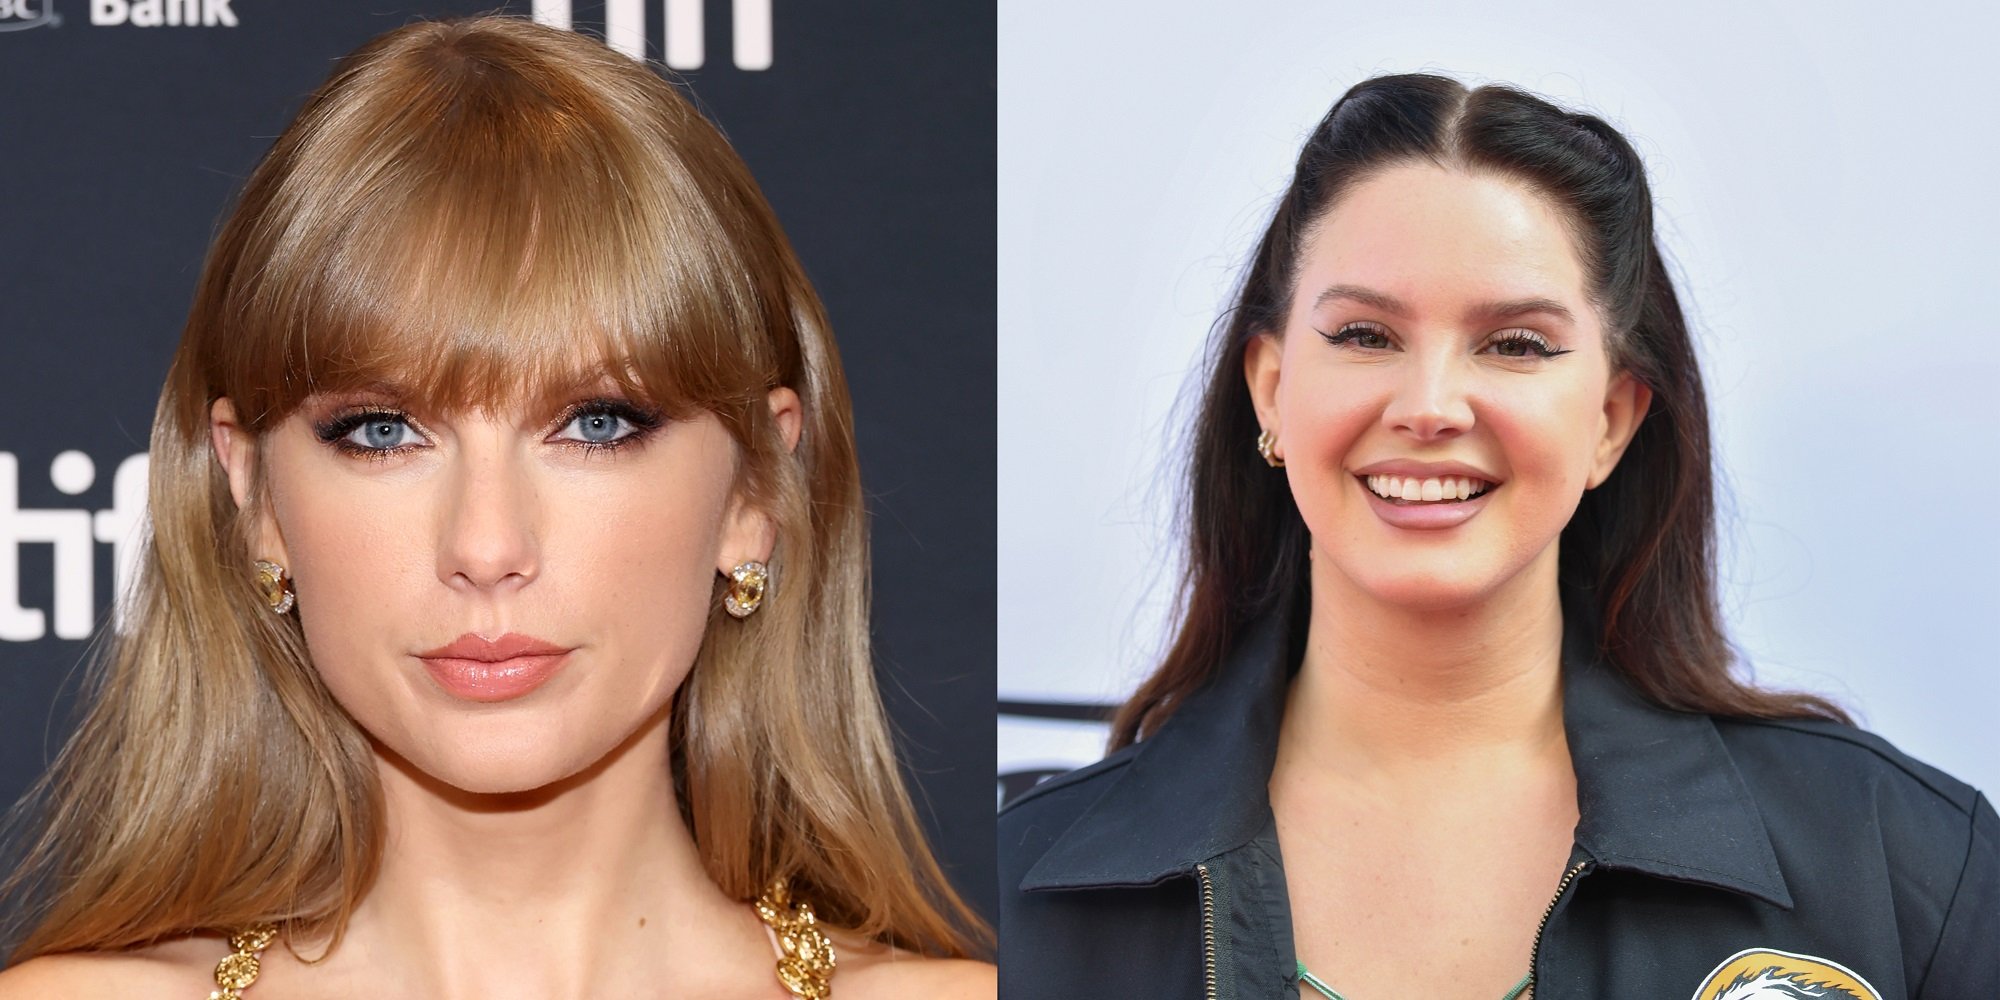 A joined photo of Taylor Swift and Lana Del Rey looking at the camera